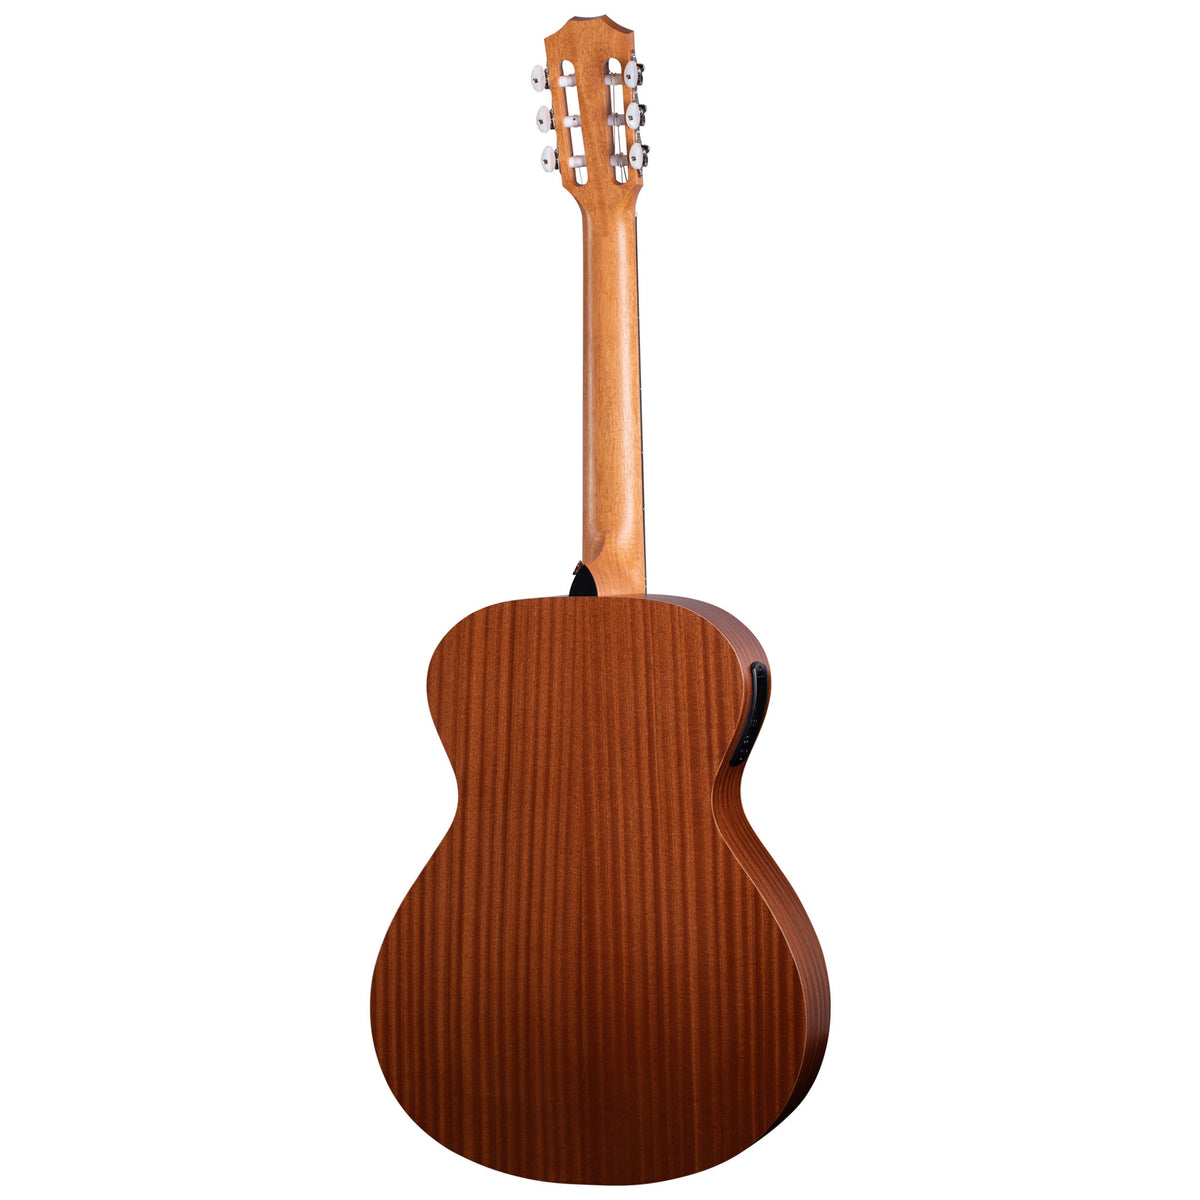 Taylor Academy 12e-N Layered Sapele Acoustic-Electric Classical Guitar